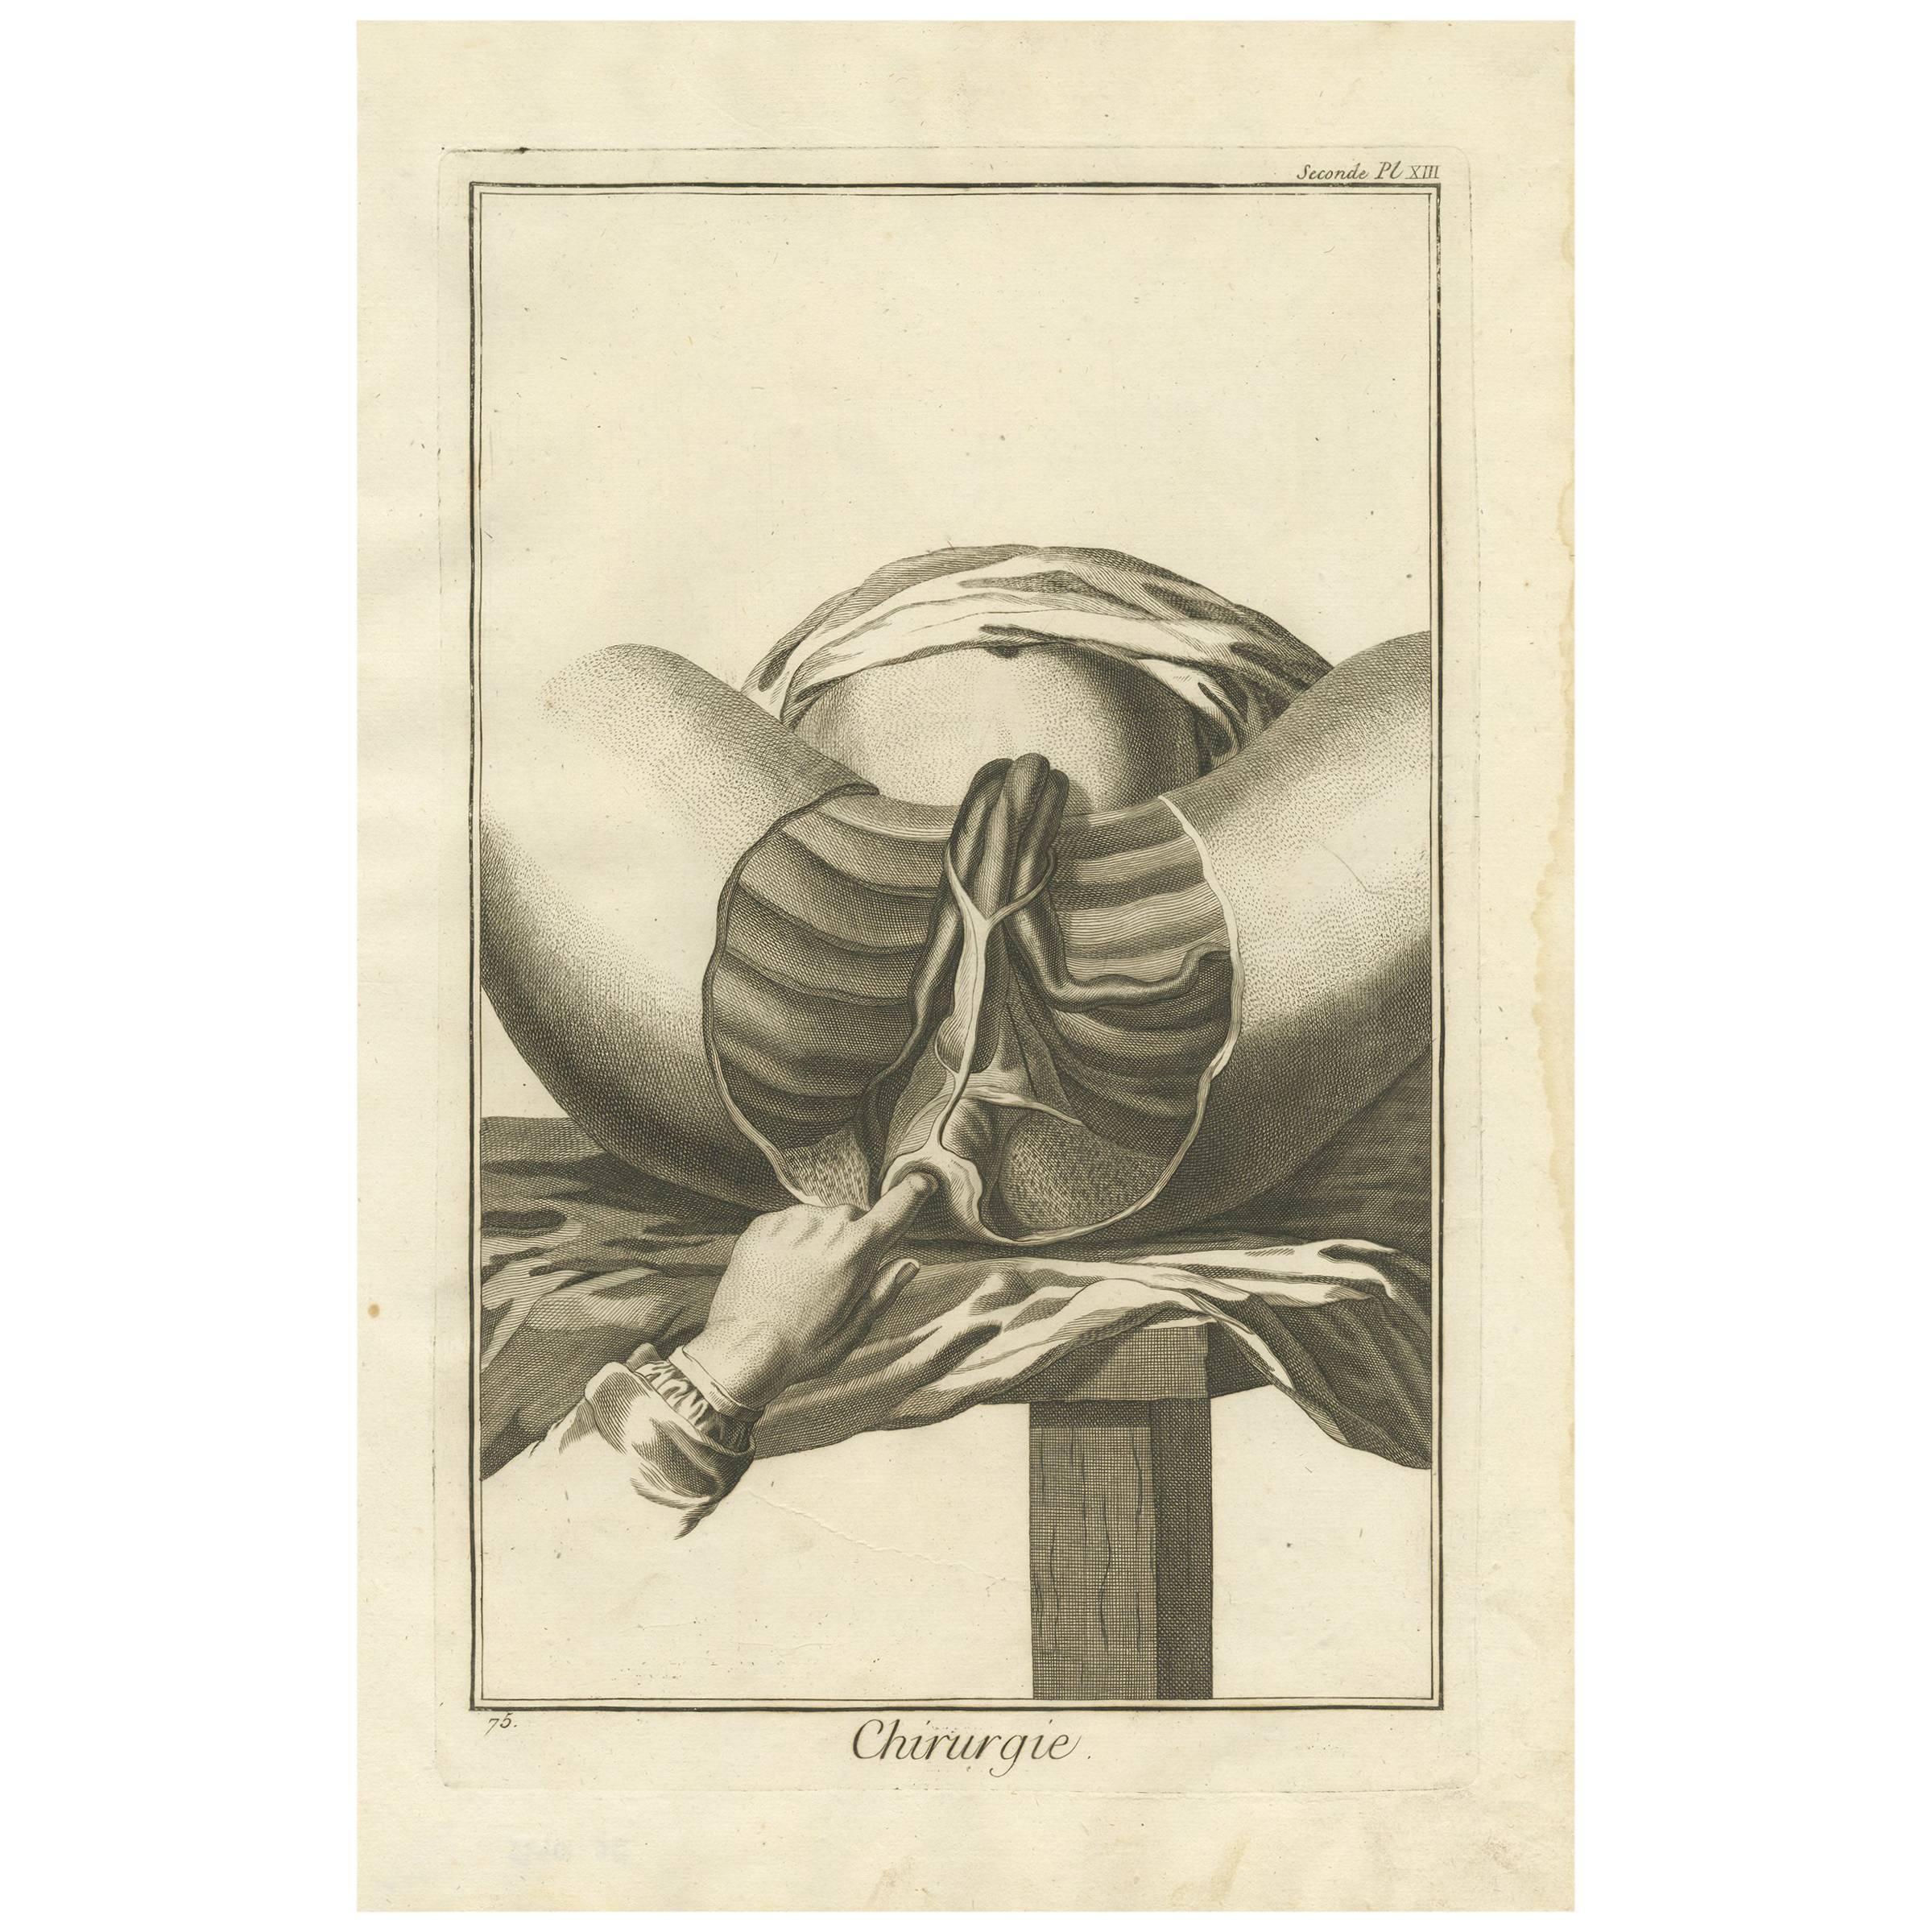 Antique Medical Print 'Seconde Pl. XIII' by D. Diderot, circa 1760 For Sale